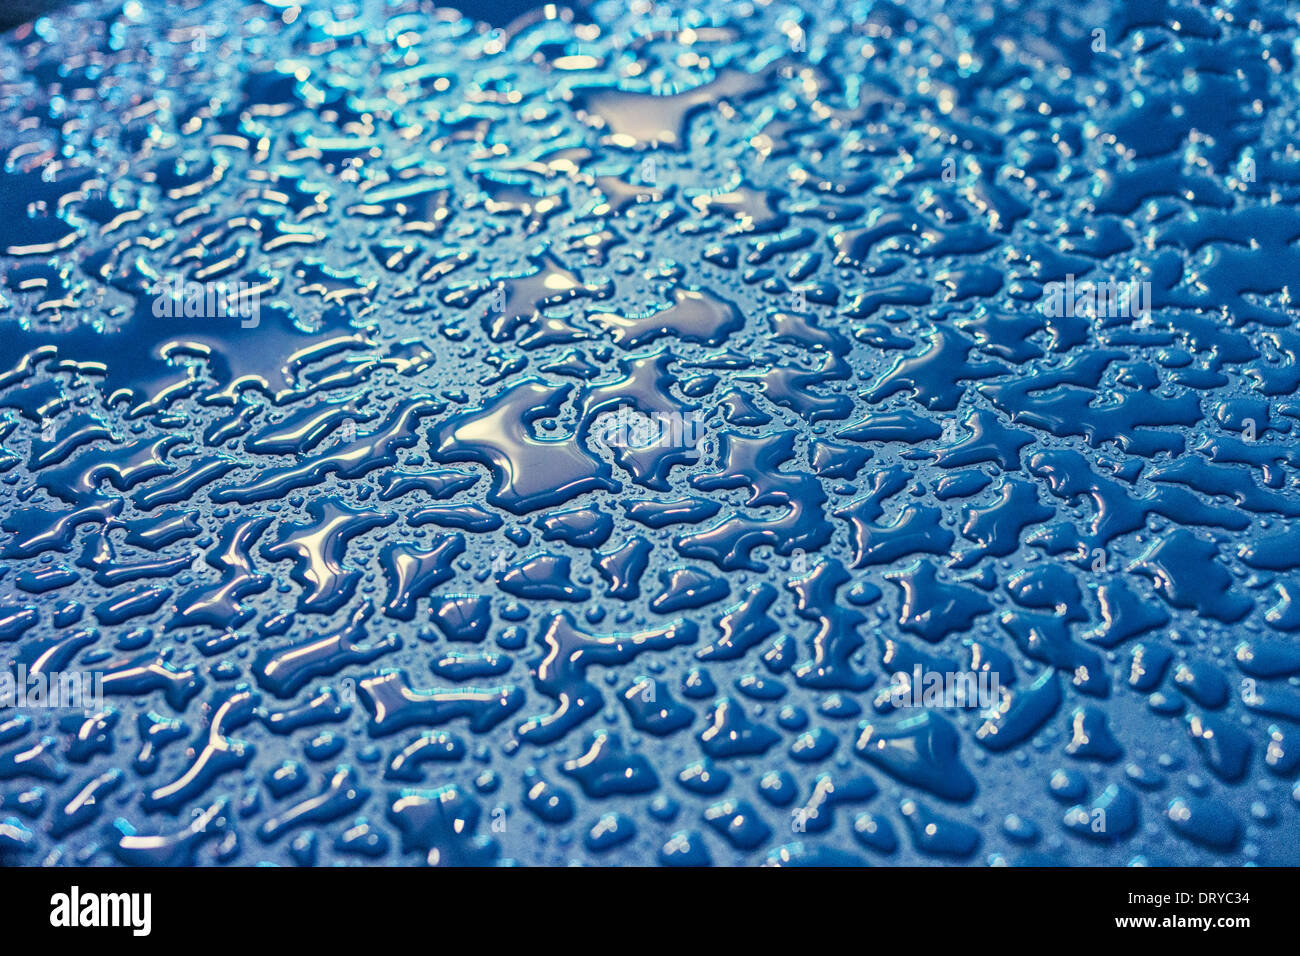 Water droplets on car bonnet Stock Photo